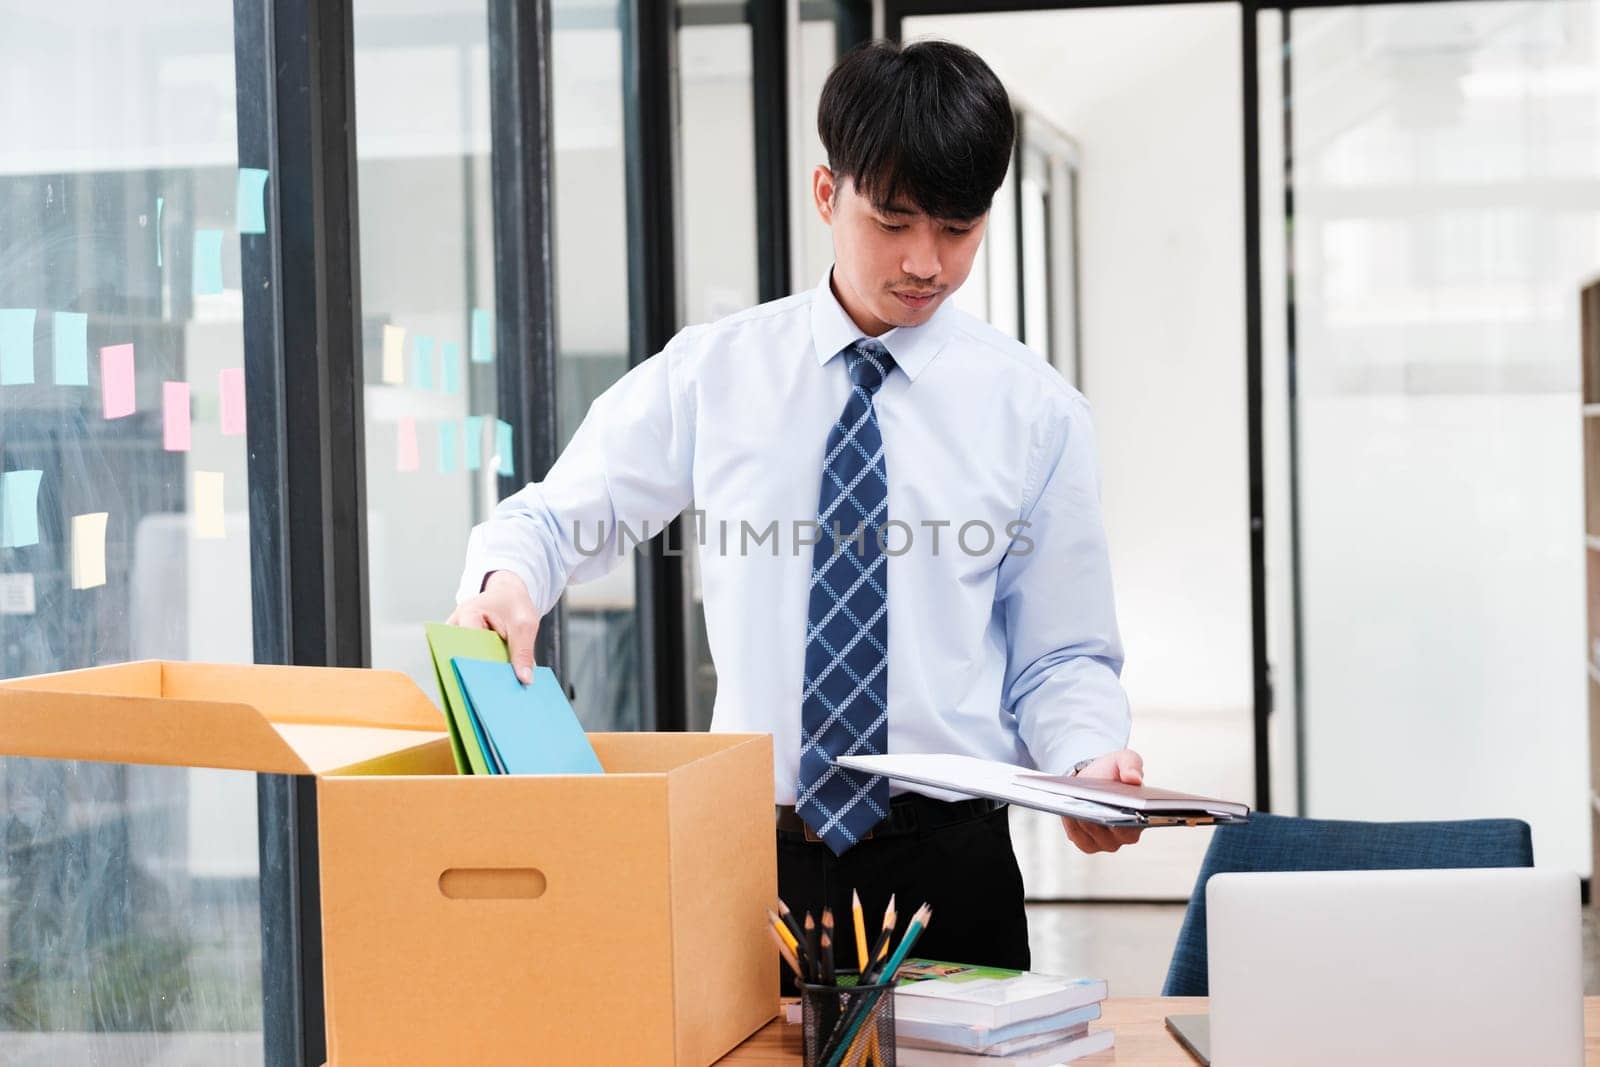 A man in a suit is opening a cardboard box on a desk by ijeab